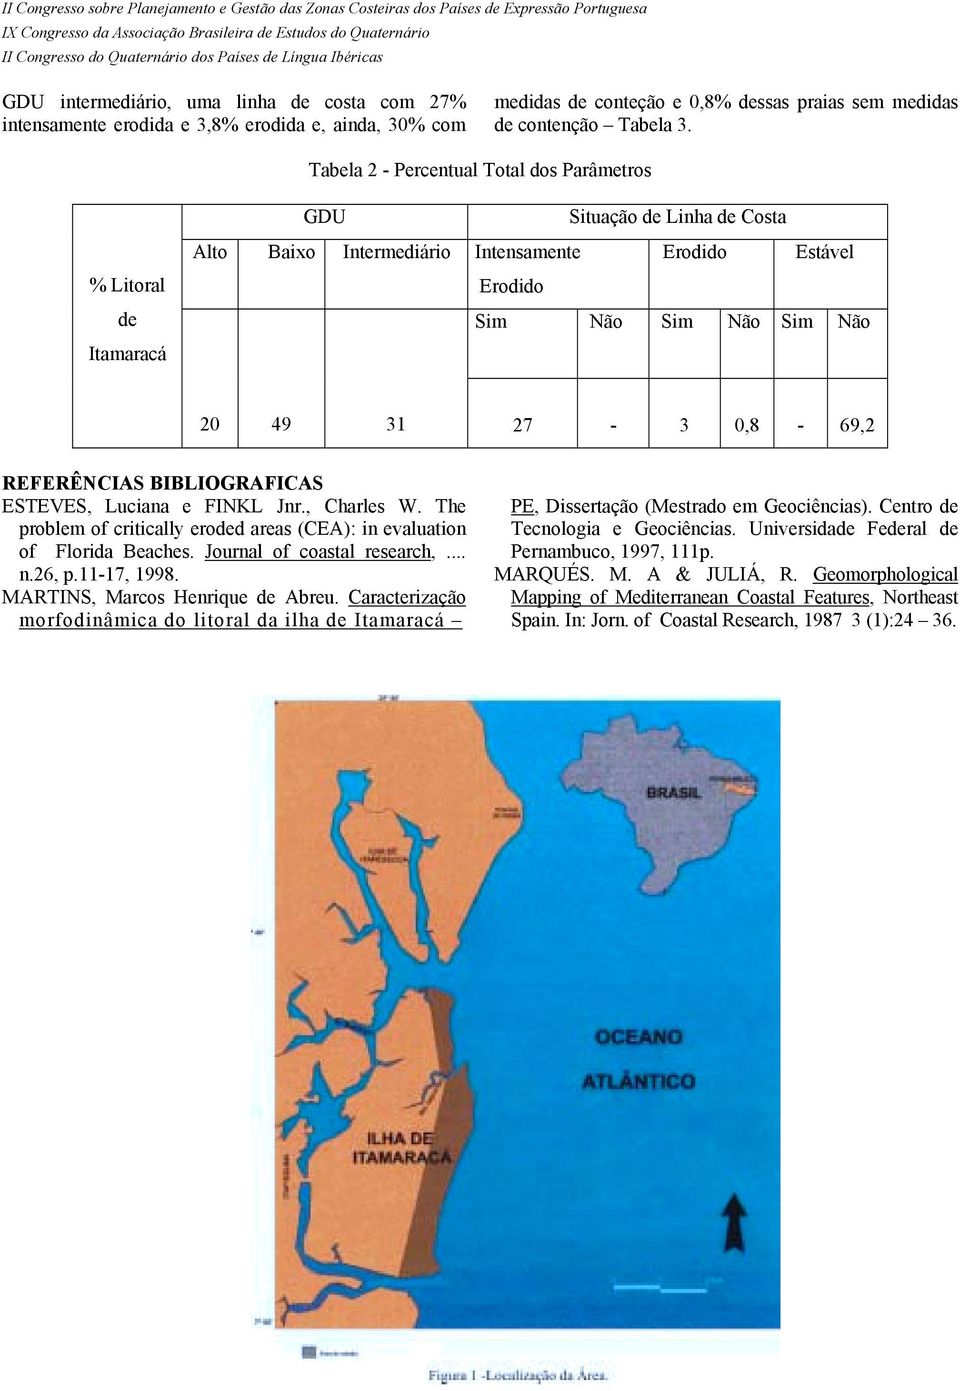 , Charles W. The problem of critically erod areas (CEA): in evaluation of Florida Beaches. Journal of coastal research,... n.26, p.11-17, 1998. MARTINS, Marcos Henrique Abreu.